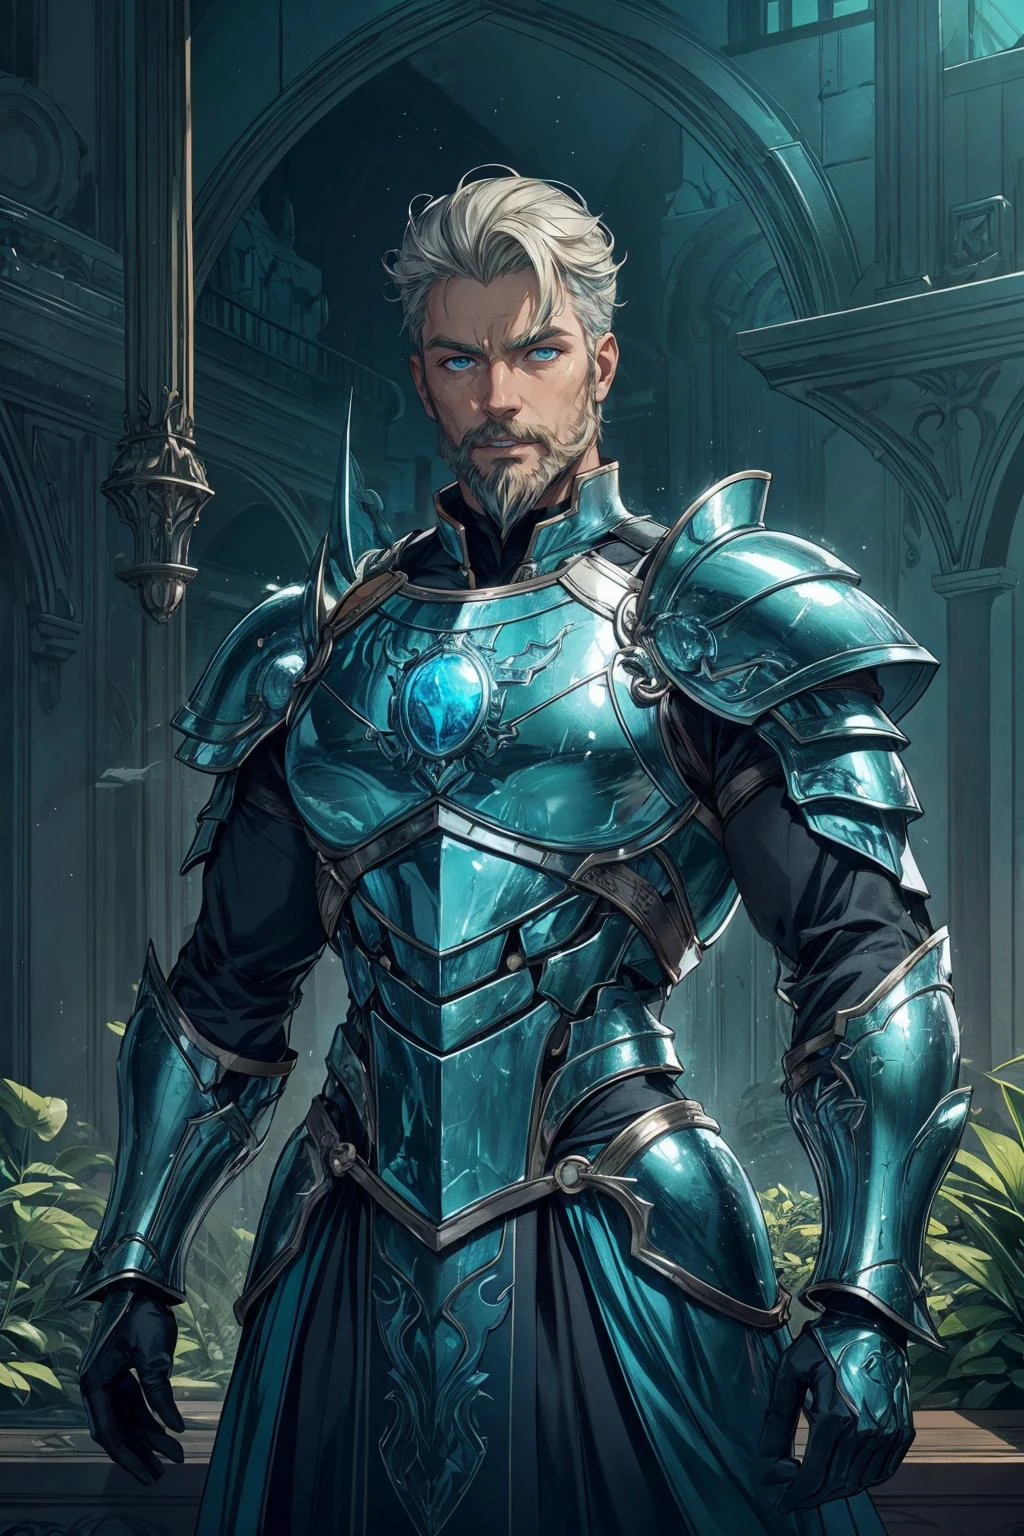 (1man, thin adult spanish male:1.2),  light blue eyes, medium blonde hair, beard, 
Style-GravityMagic, portrait, solo, half shot, looking up, detailed background, detailed face, (glasstech, glass theme:1.1)  verdant-warrior, wooden armor, blending of plants with metal, plated armor,  antlers, green magical lights, dynamic pose, peaceful, nature powers,  glowing green druidic inscriptions etched in armor,  plant overgrowth, building left to crumble in background, spring, birds, wind blowing, atmospheric lighting, magical atmosphere,